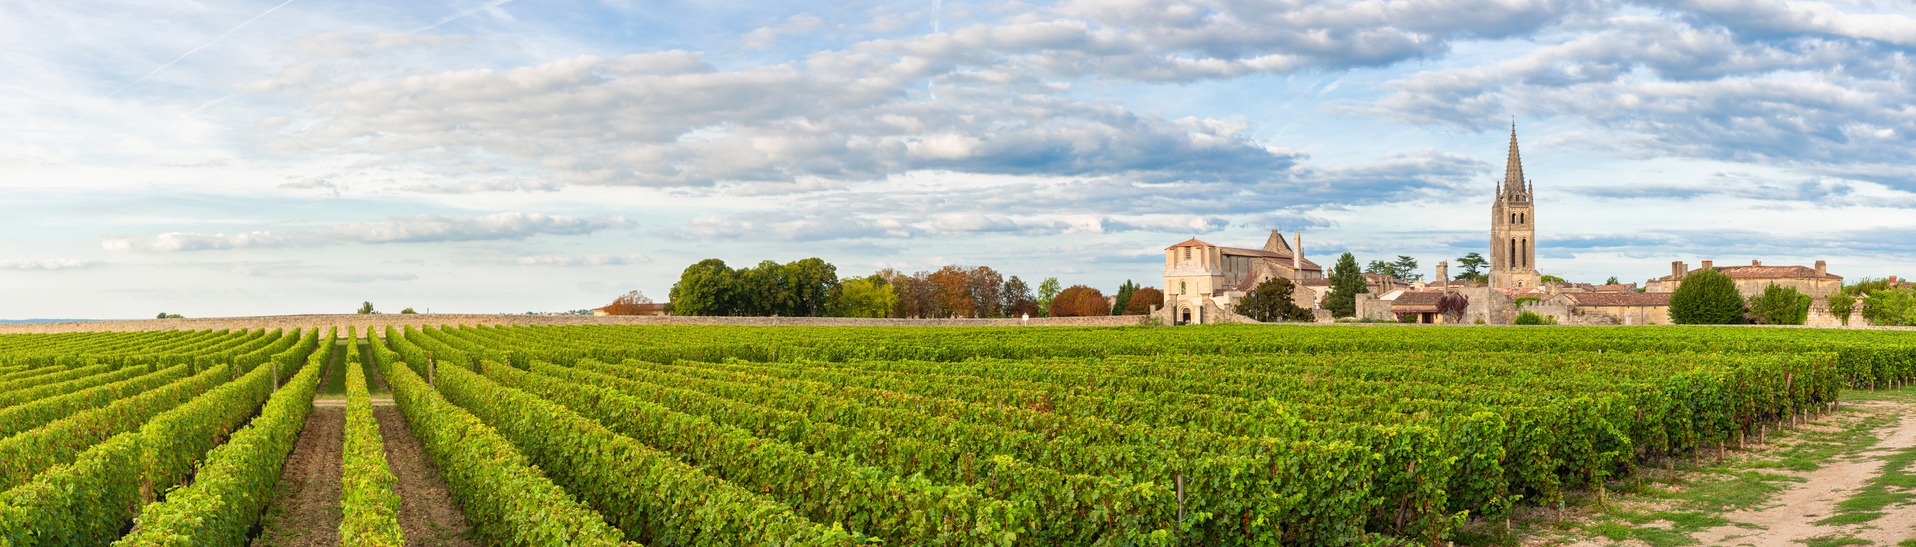 Panoramic view of vineyards of Saint Emilion, Bordeaux, Gironde, France. Medieval church in old town and rows of vine on a grape field.